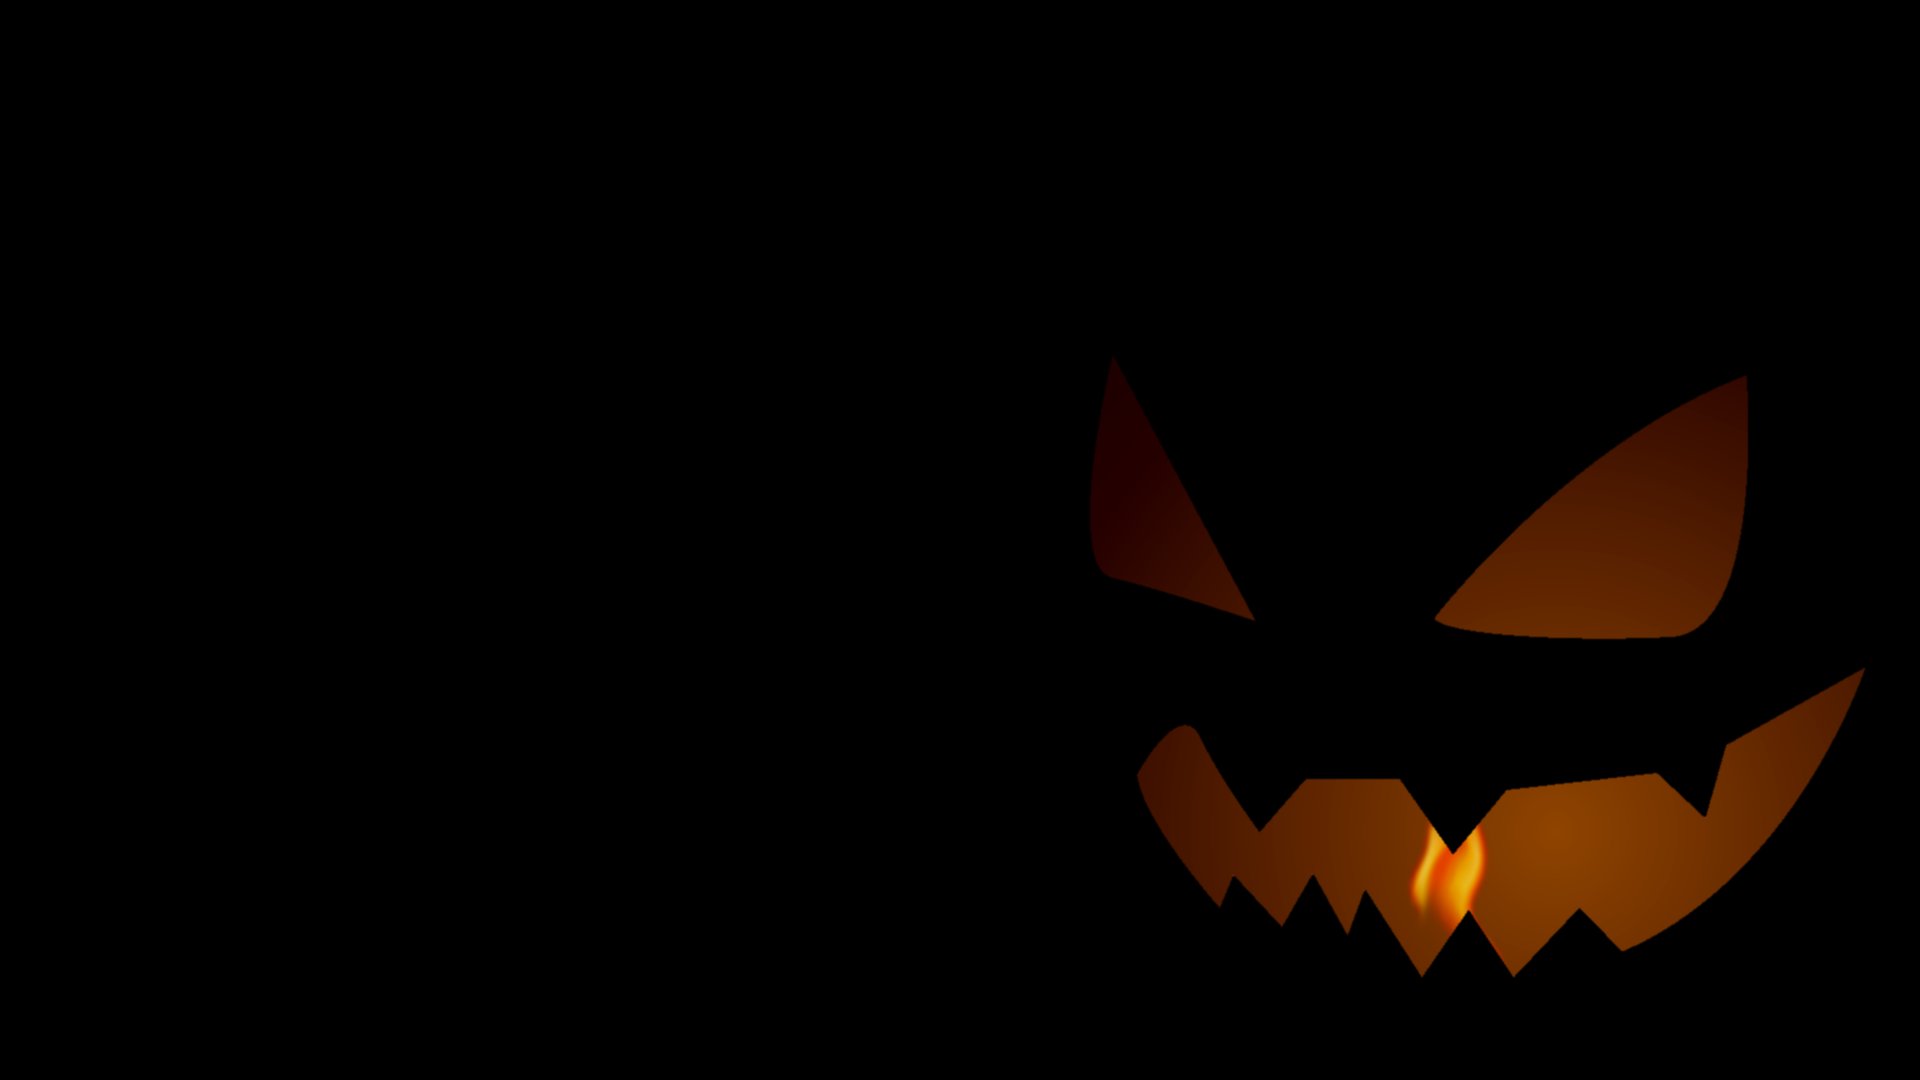 Free download Unusual Halloween Background Animated Halloween with Dark Background [1920x1080] for your Desktop, Mobile & Tablet. Explore Animated Halloween Wallpaper. Animated Halloween Wallpaper, Free Halloween 3D